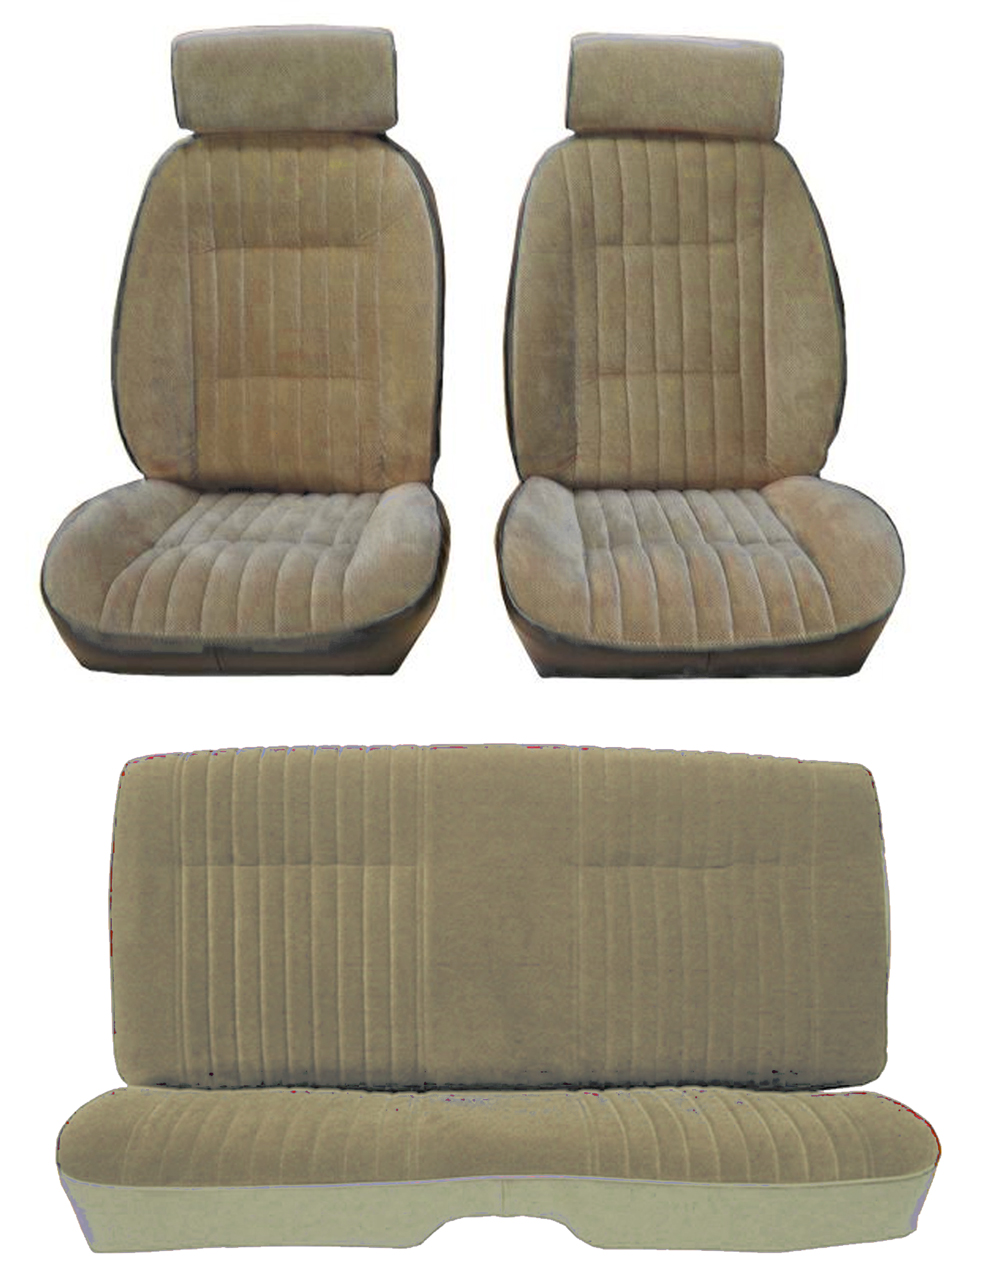 81-88 Monte Carlo SS Front Bucket and Rear Seat Covers Tan Velour w/Vinyl Sides